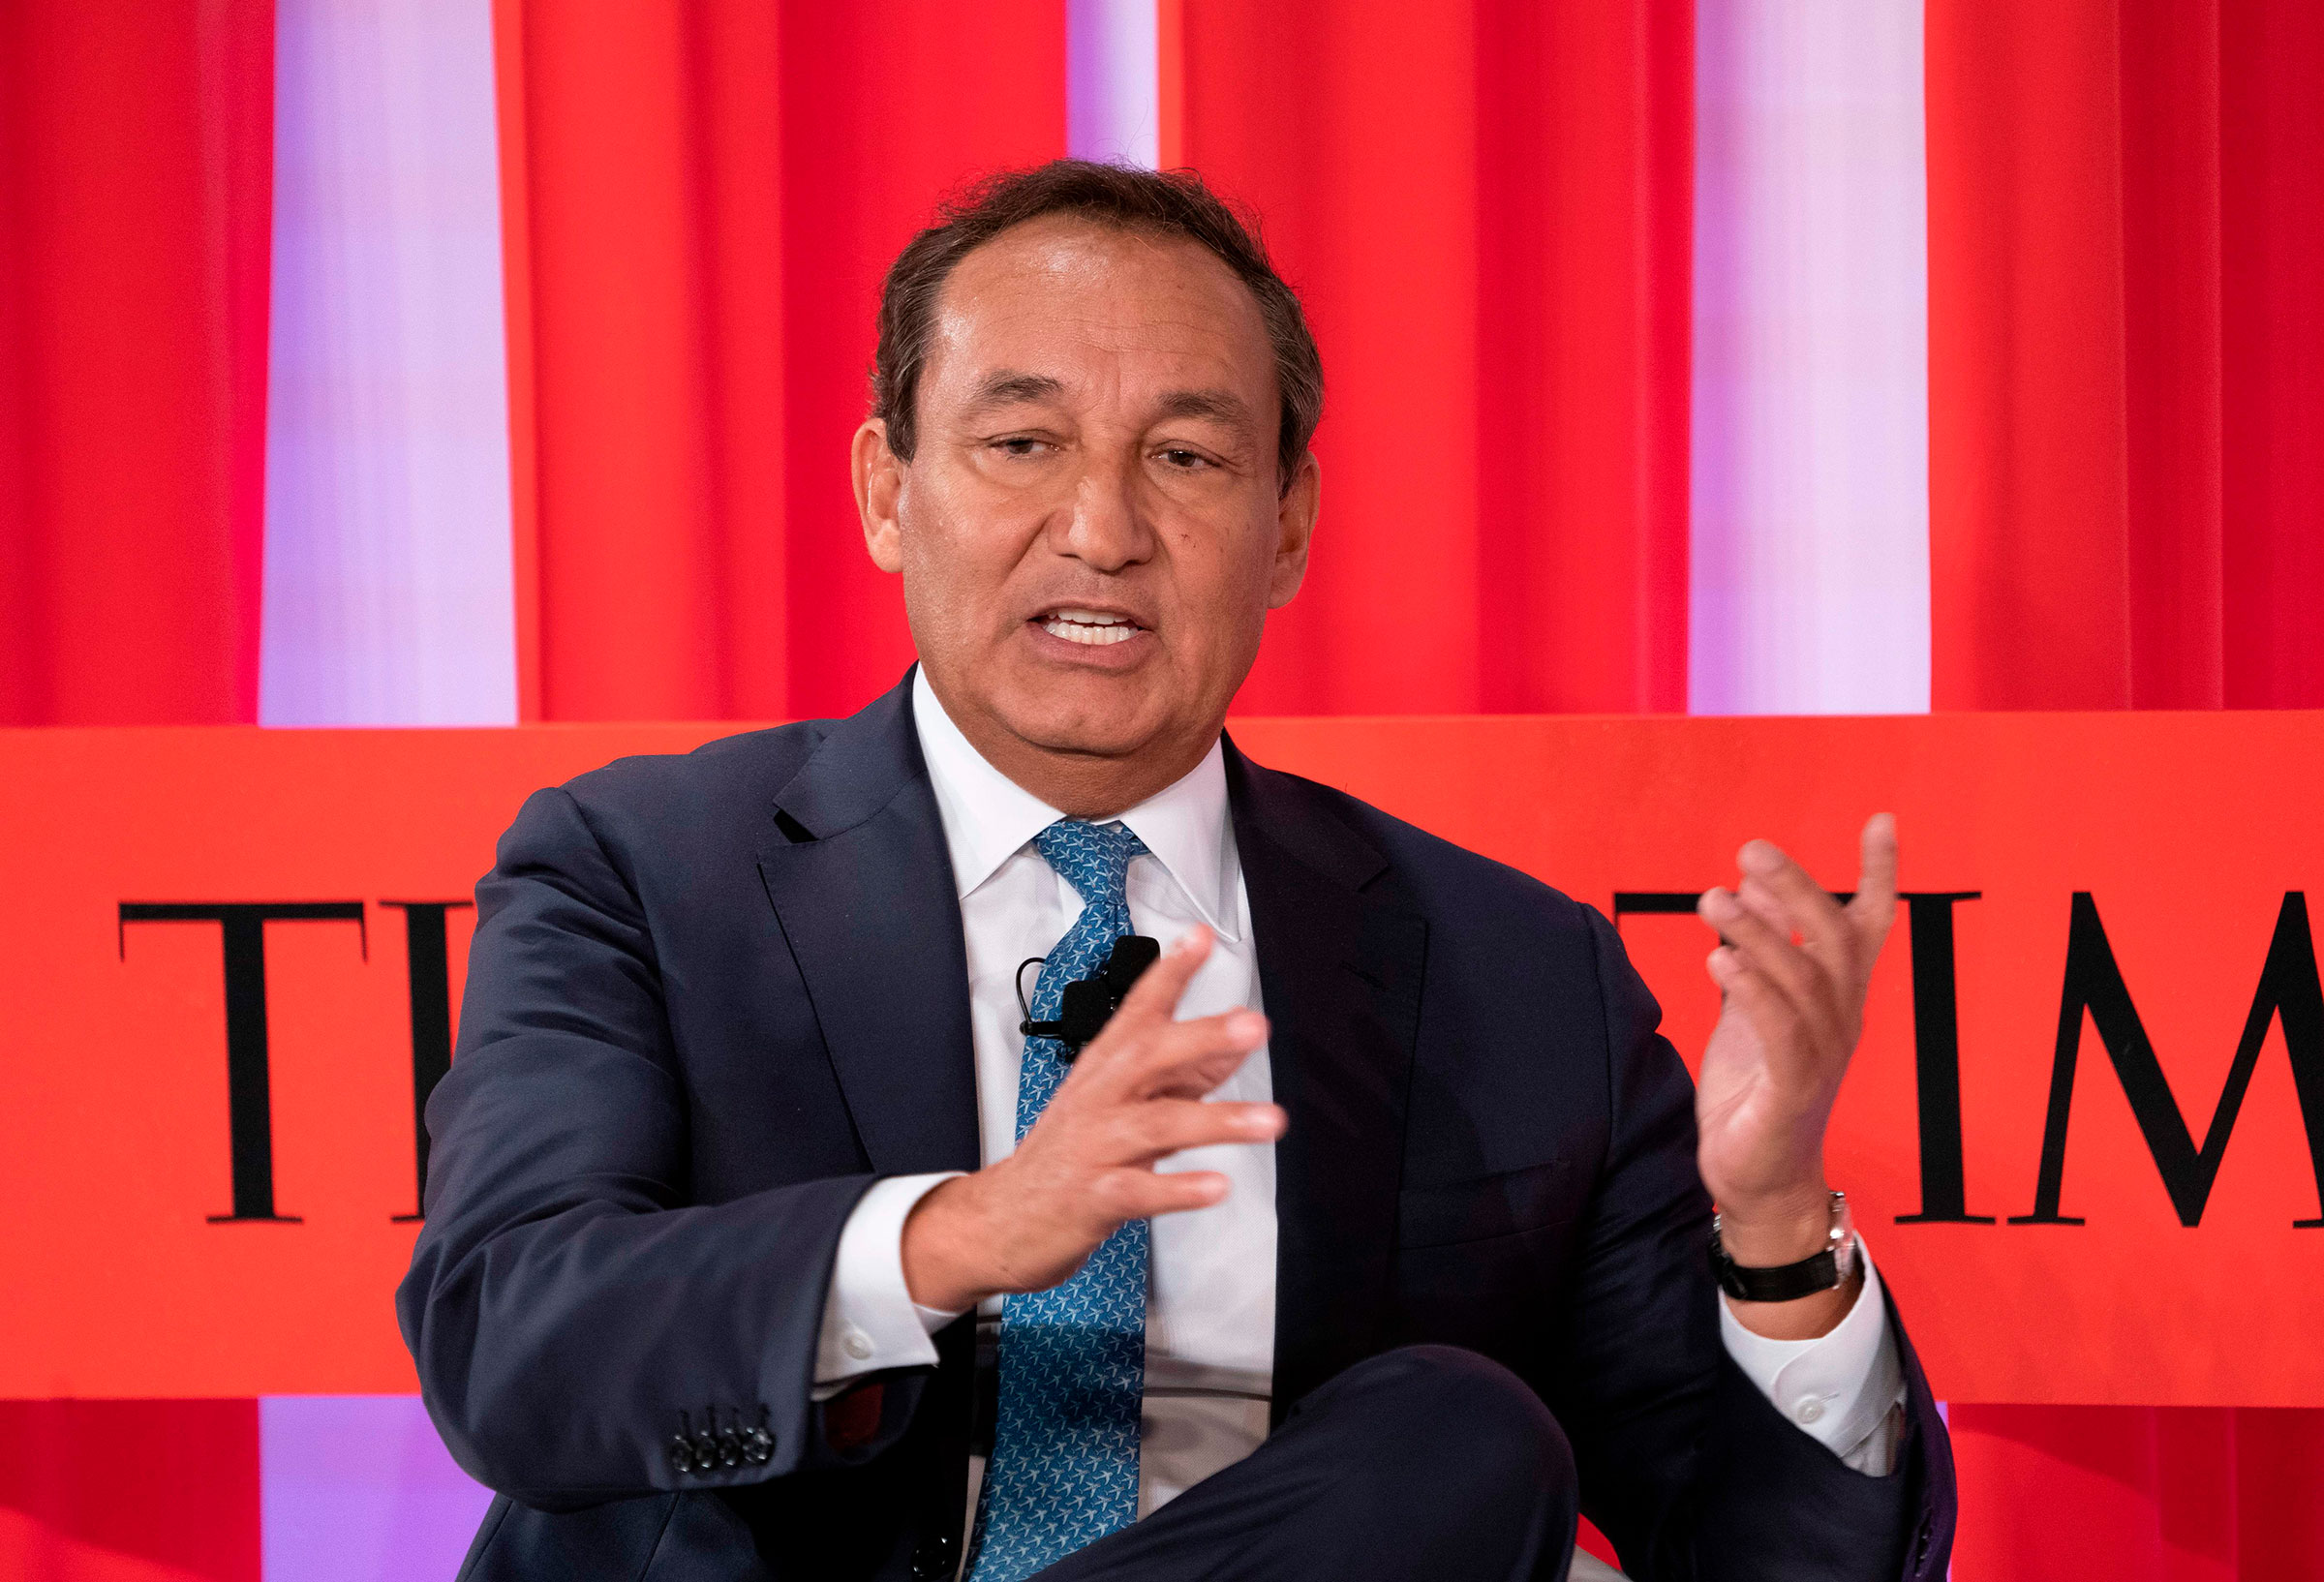 Chief executive officer of United Airlines Oscar Munoz speaks during the Time 100 Summit event on April 23, 2019, in New York. (Don Emmert—AFP/Getty Images)